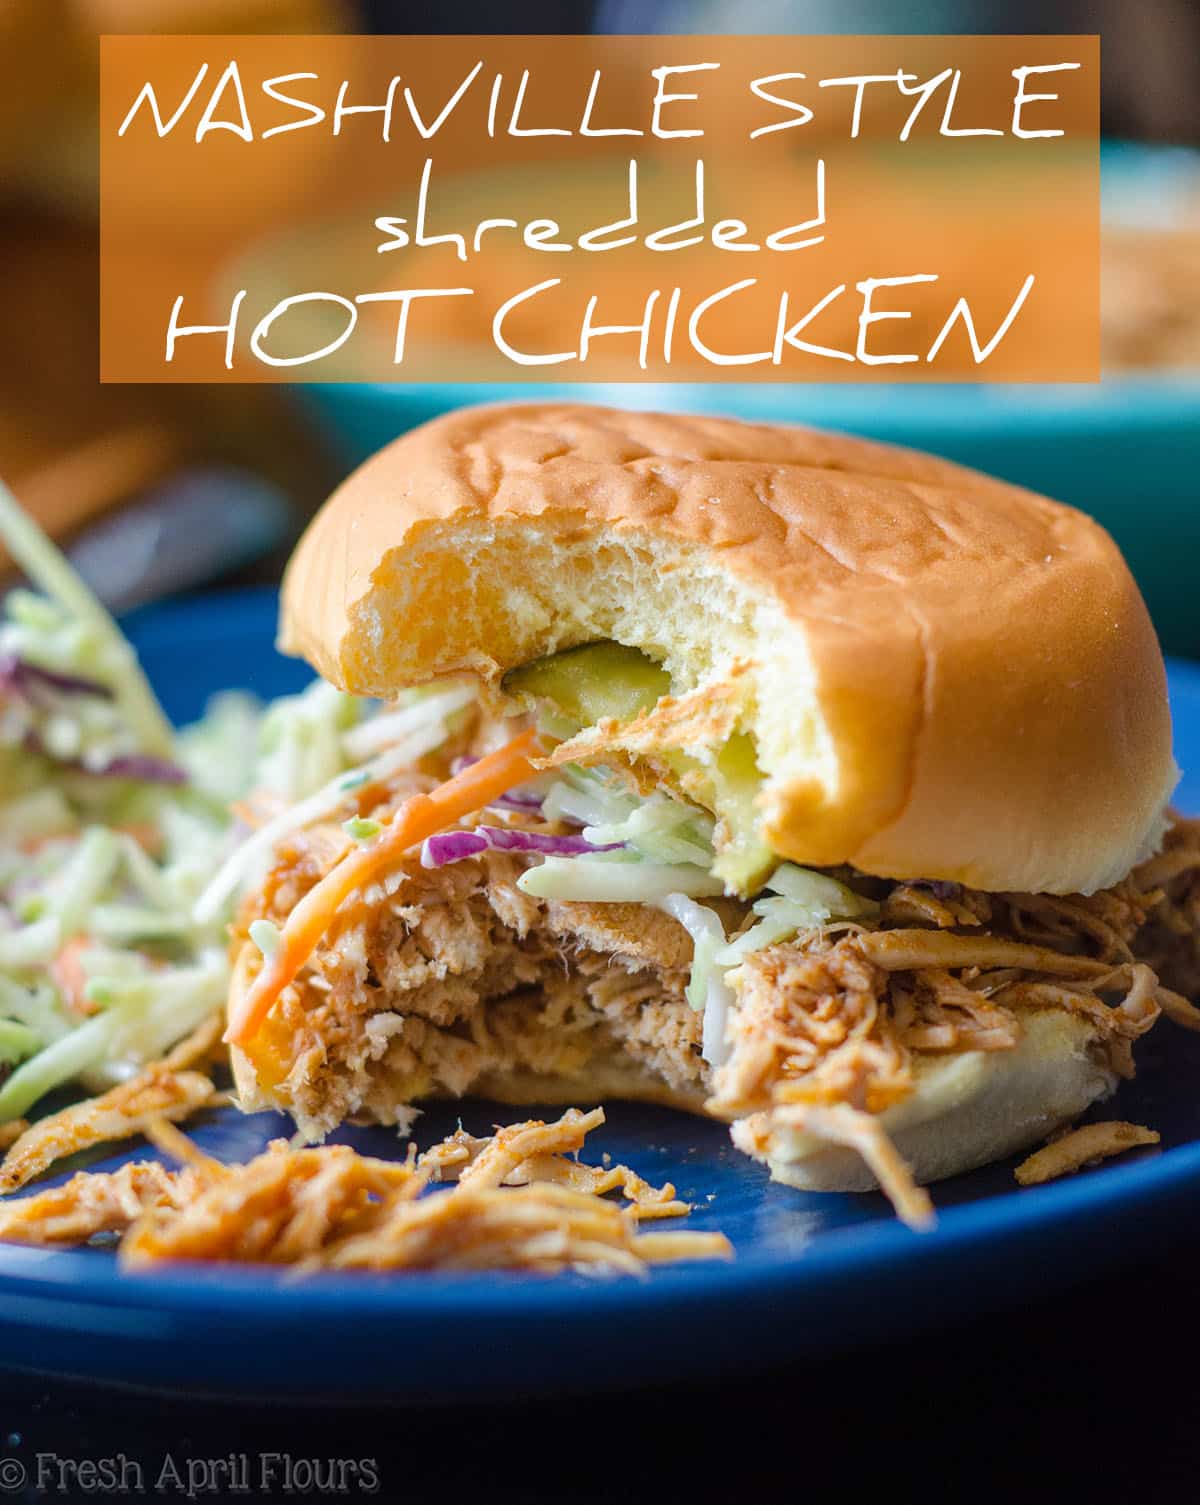 Bring the flavor of the south into your kitchen with an easy, slow cooker shredded chicken recipe inspired by Nashville's iconic "hot chicken."  via @frshaprilflours